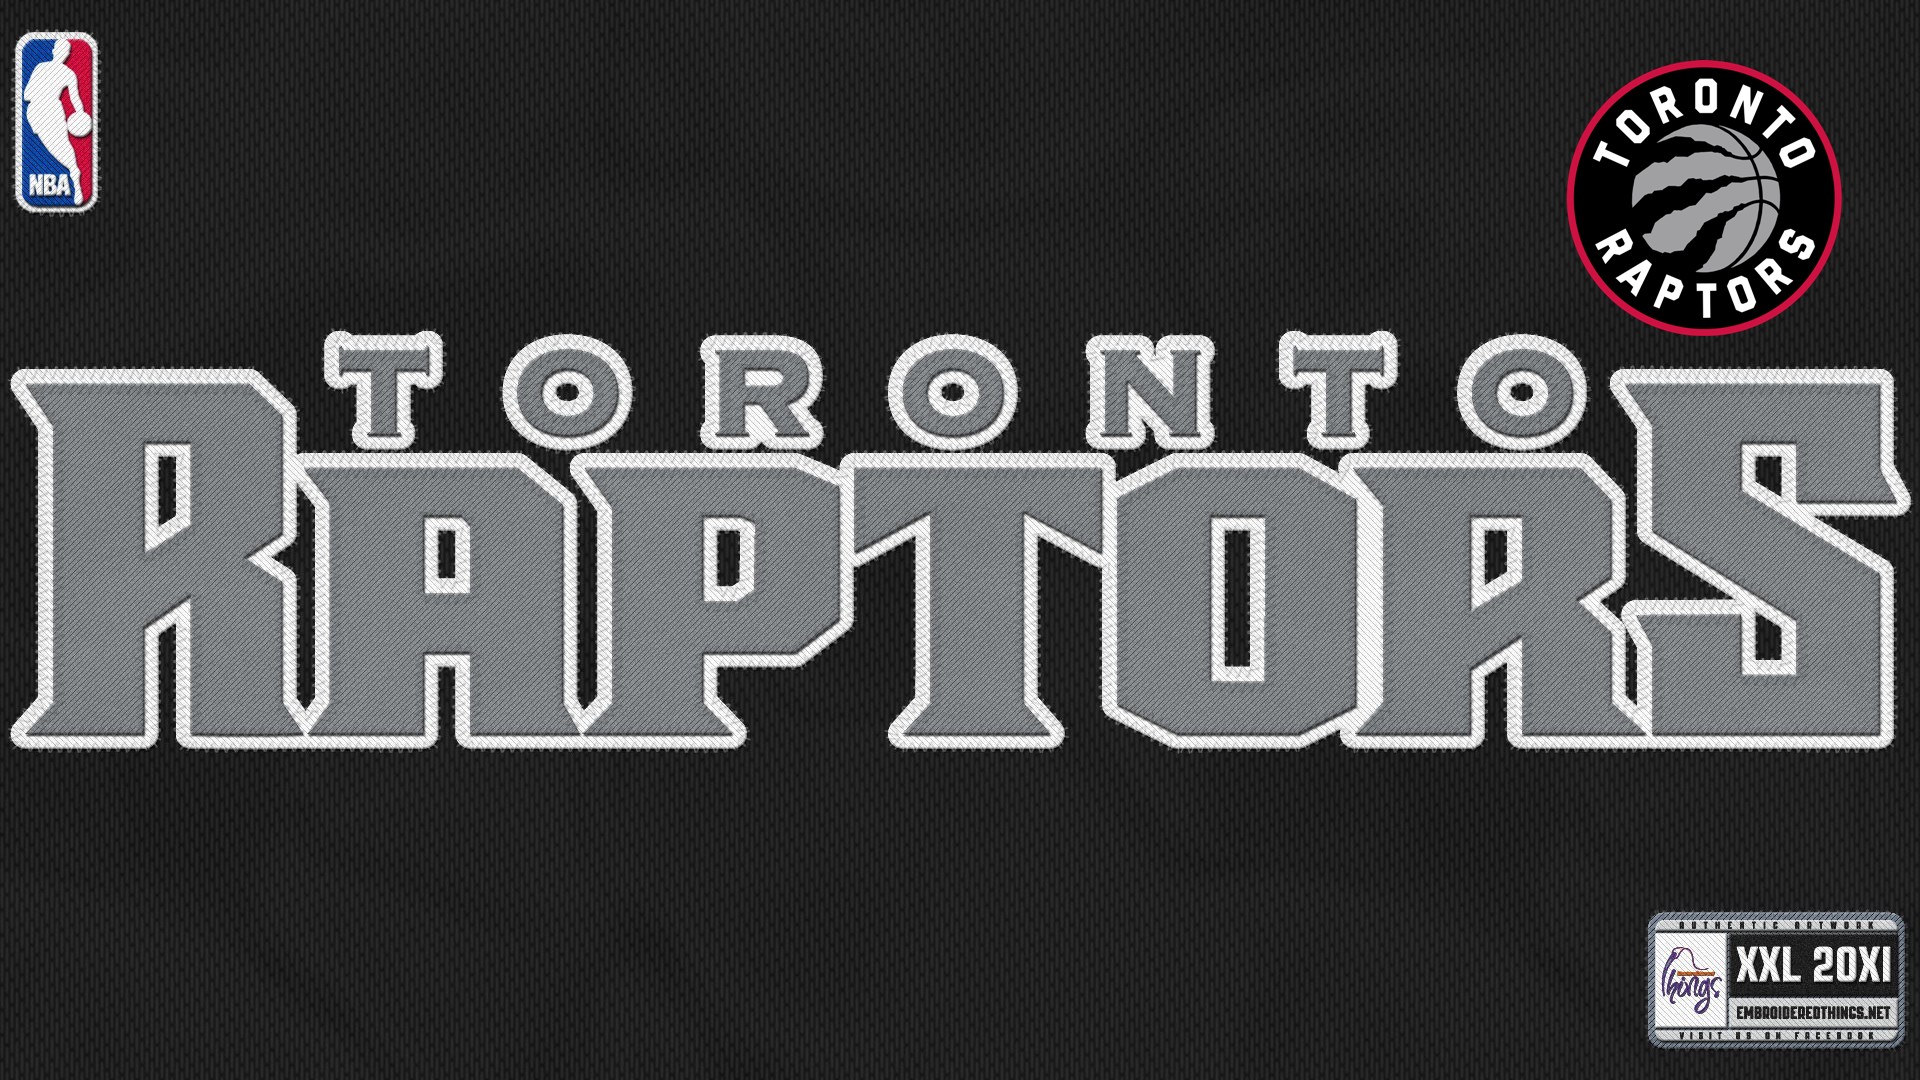 Toronto Raptors Wallpaper For Mac Backgrounds with image dimensions 1920x1080 pixel. You can make this wallpaper for your Desktop Computer Backgrounds, Windows or Mac Screensavers, iPhone Lock screen, Tablet or Android and another Mobile Phone device